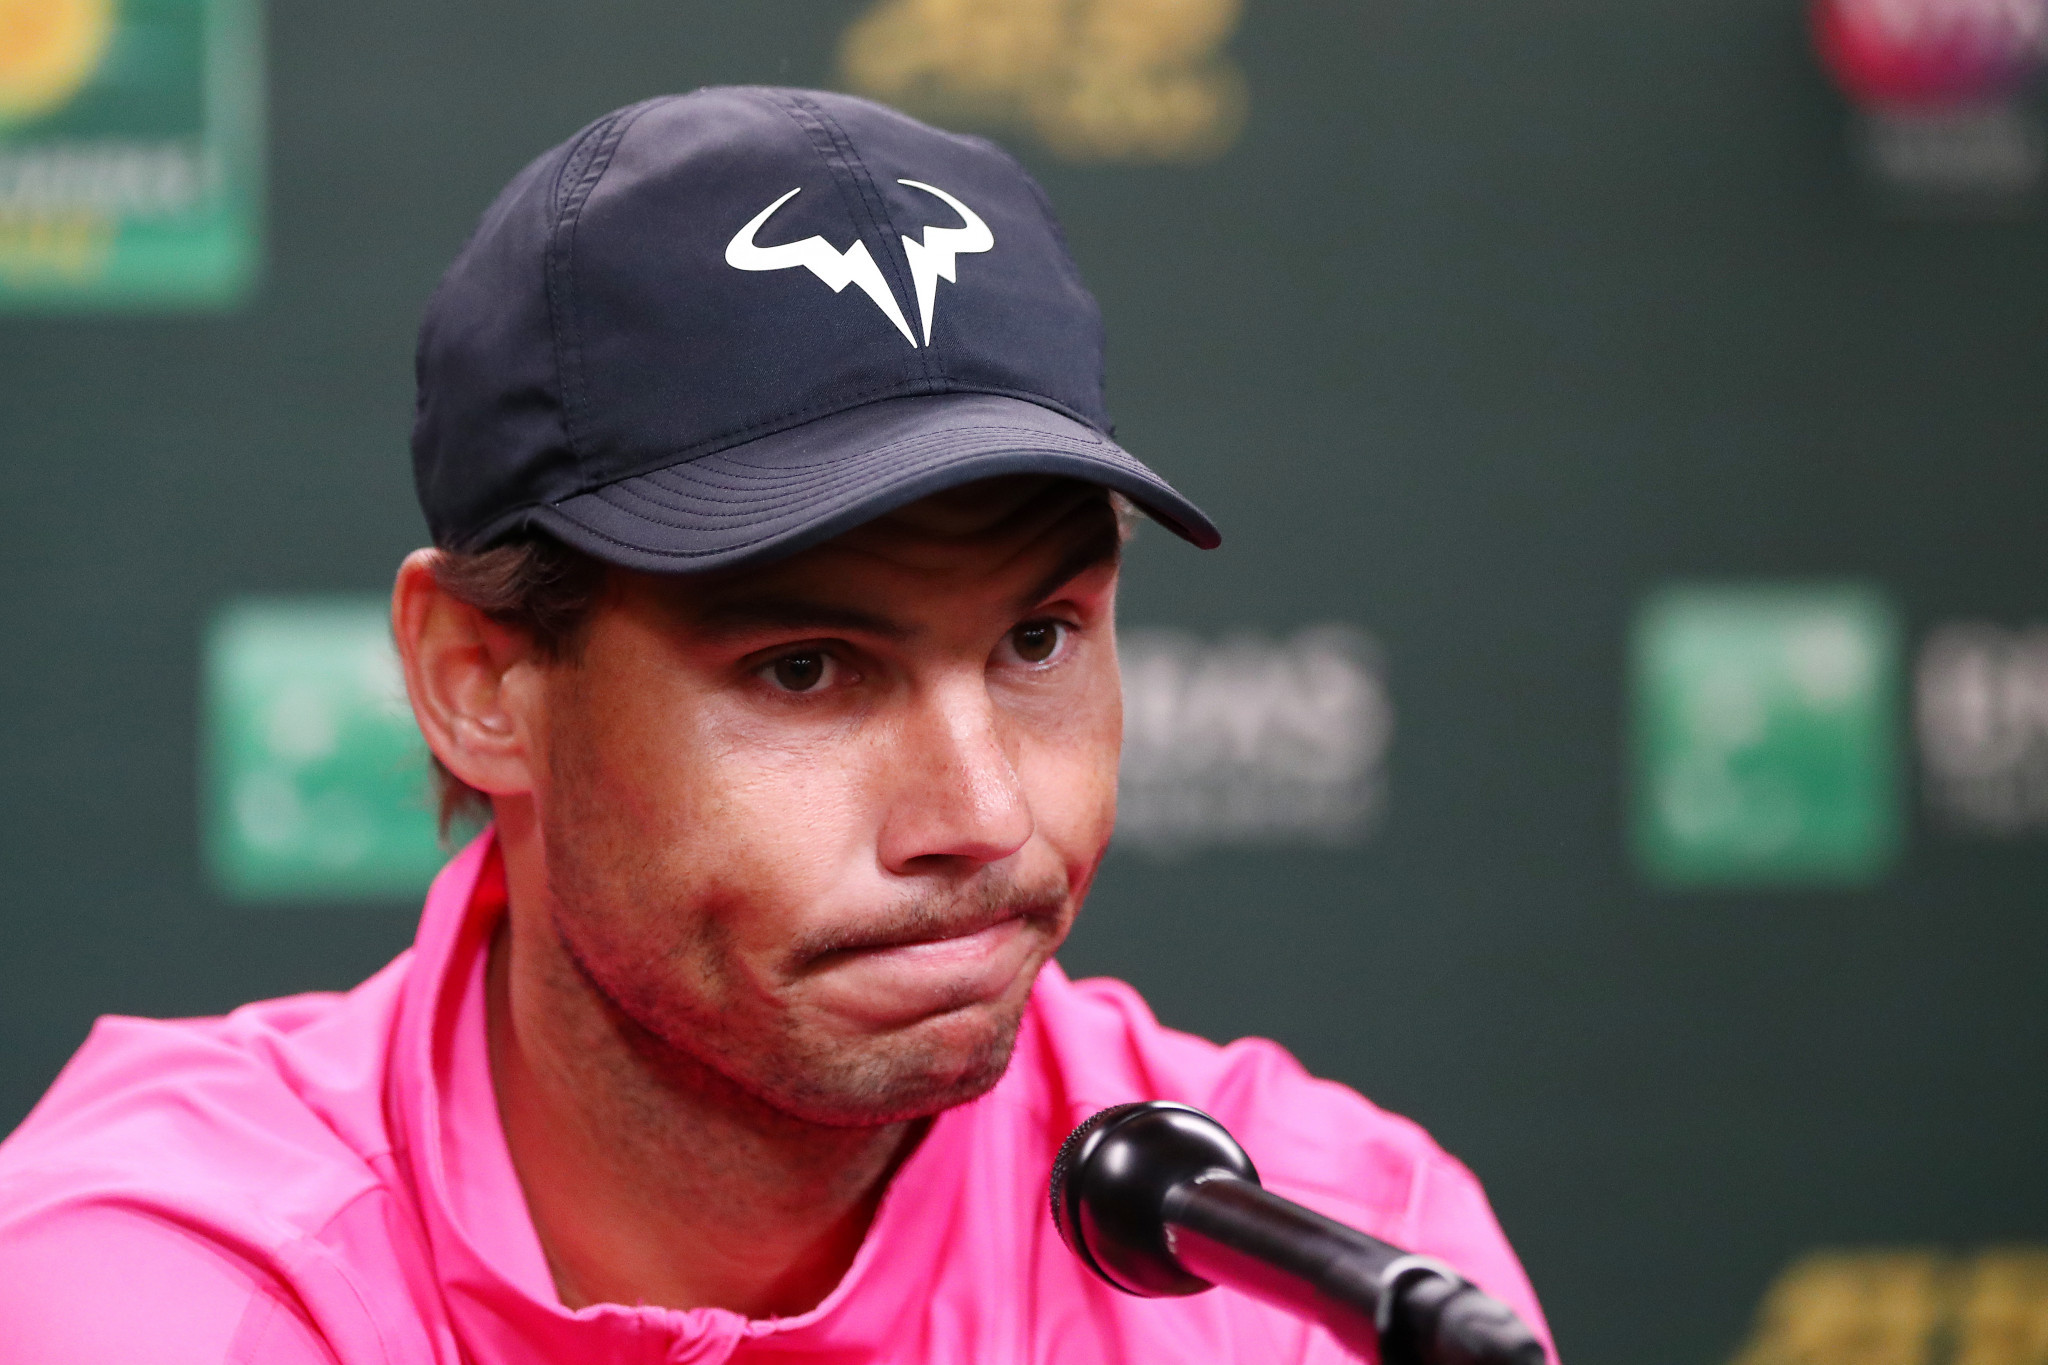 Spain's Rafael Nadal was forced to withdraw from his Indian Wells semi-final clash against Switzerland's Roger Federer due to a knee injury ©Getty Images